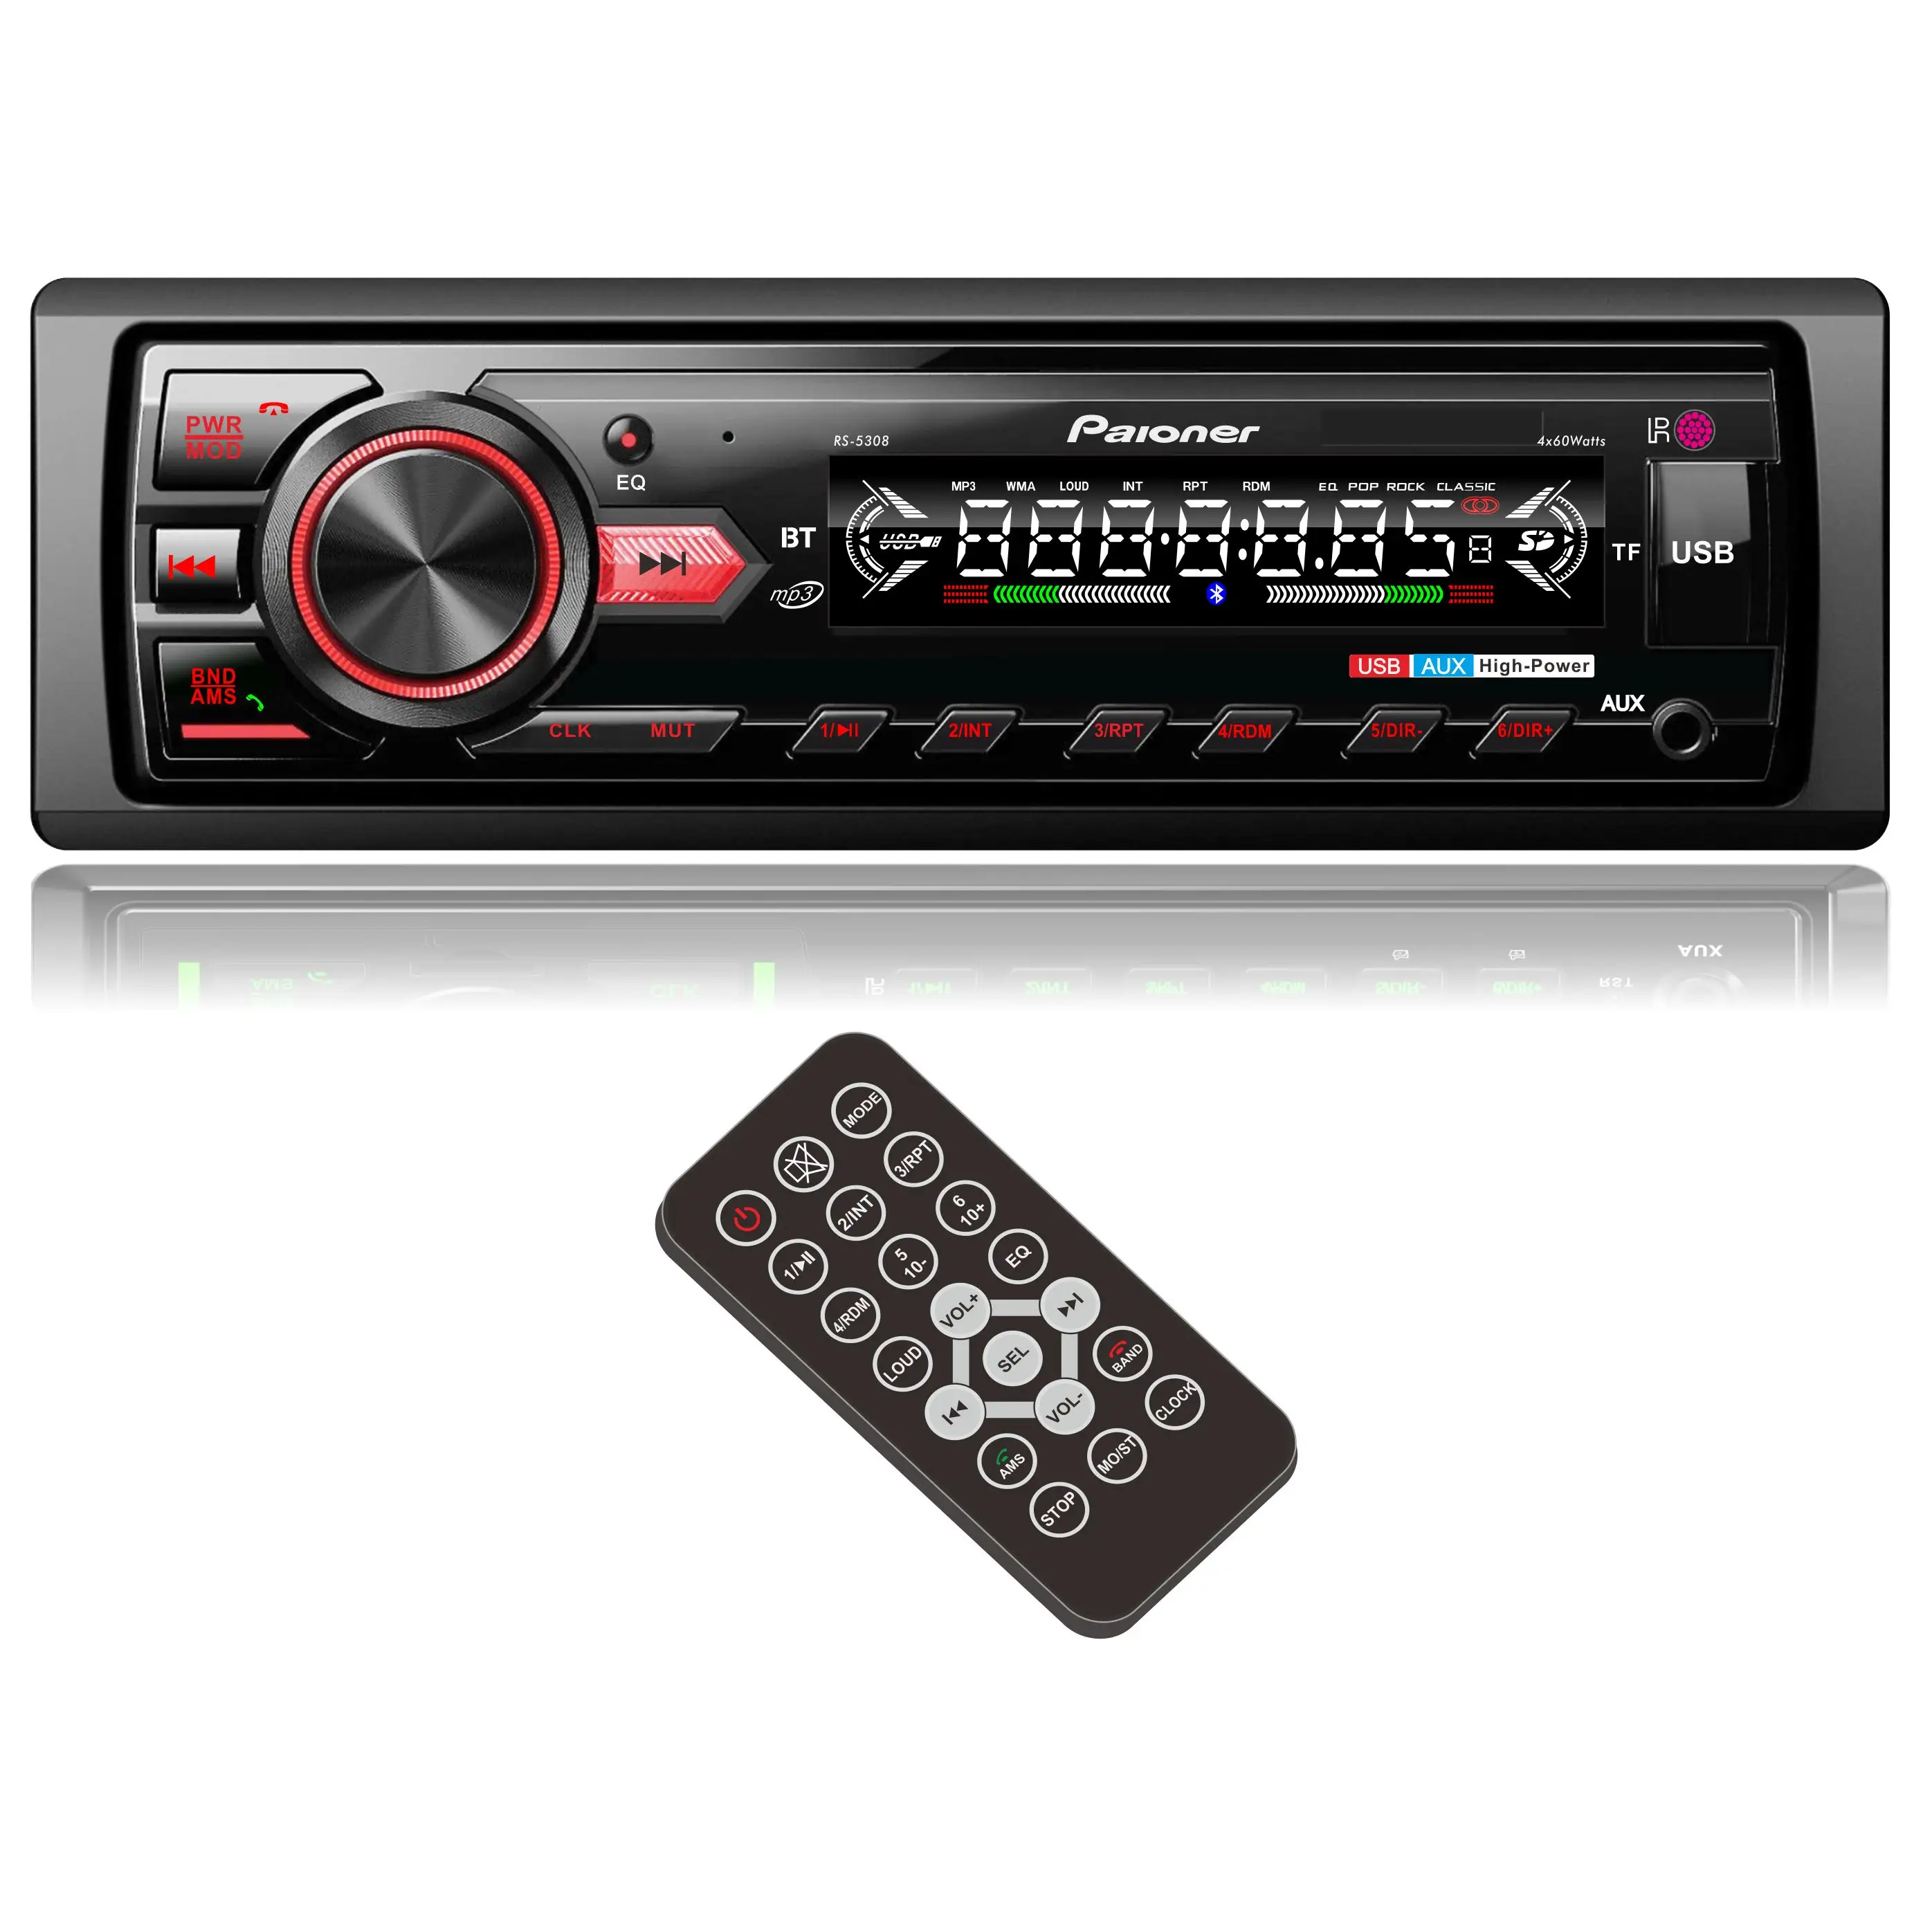 PIONNER DEH7450SD SINGLE DIN STEREO PLAYER